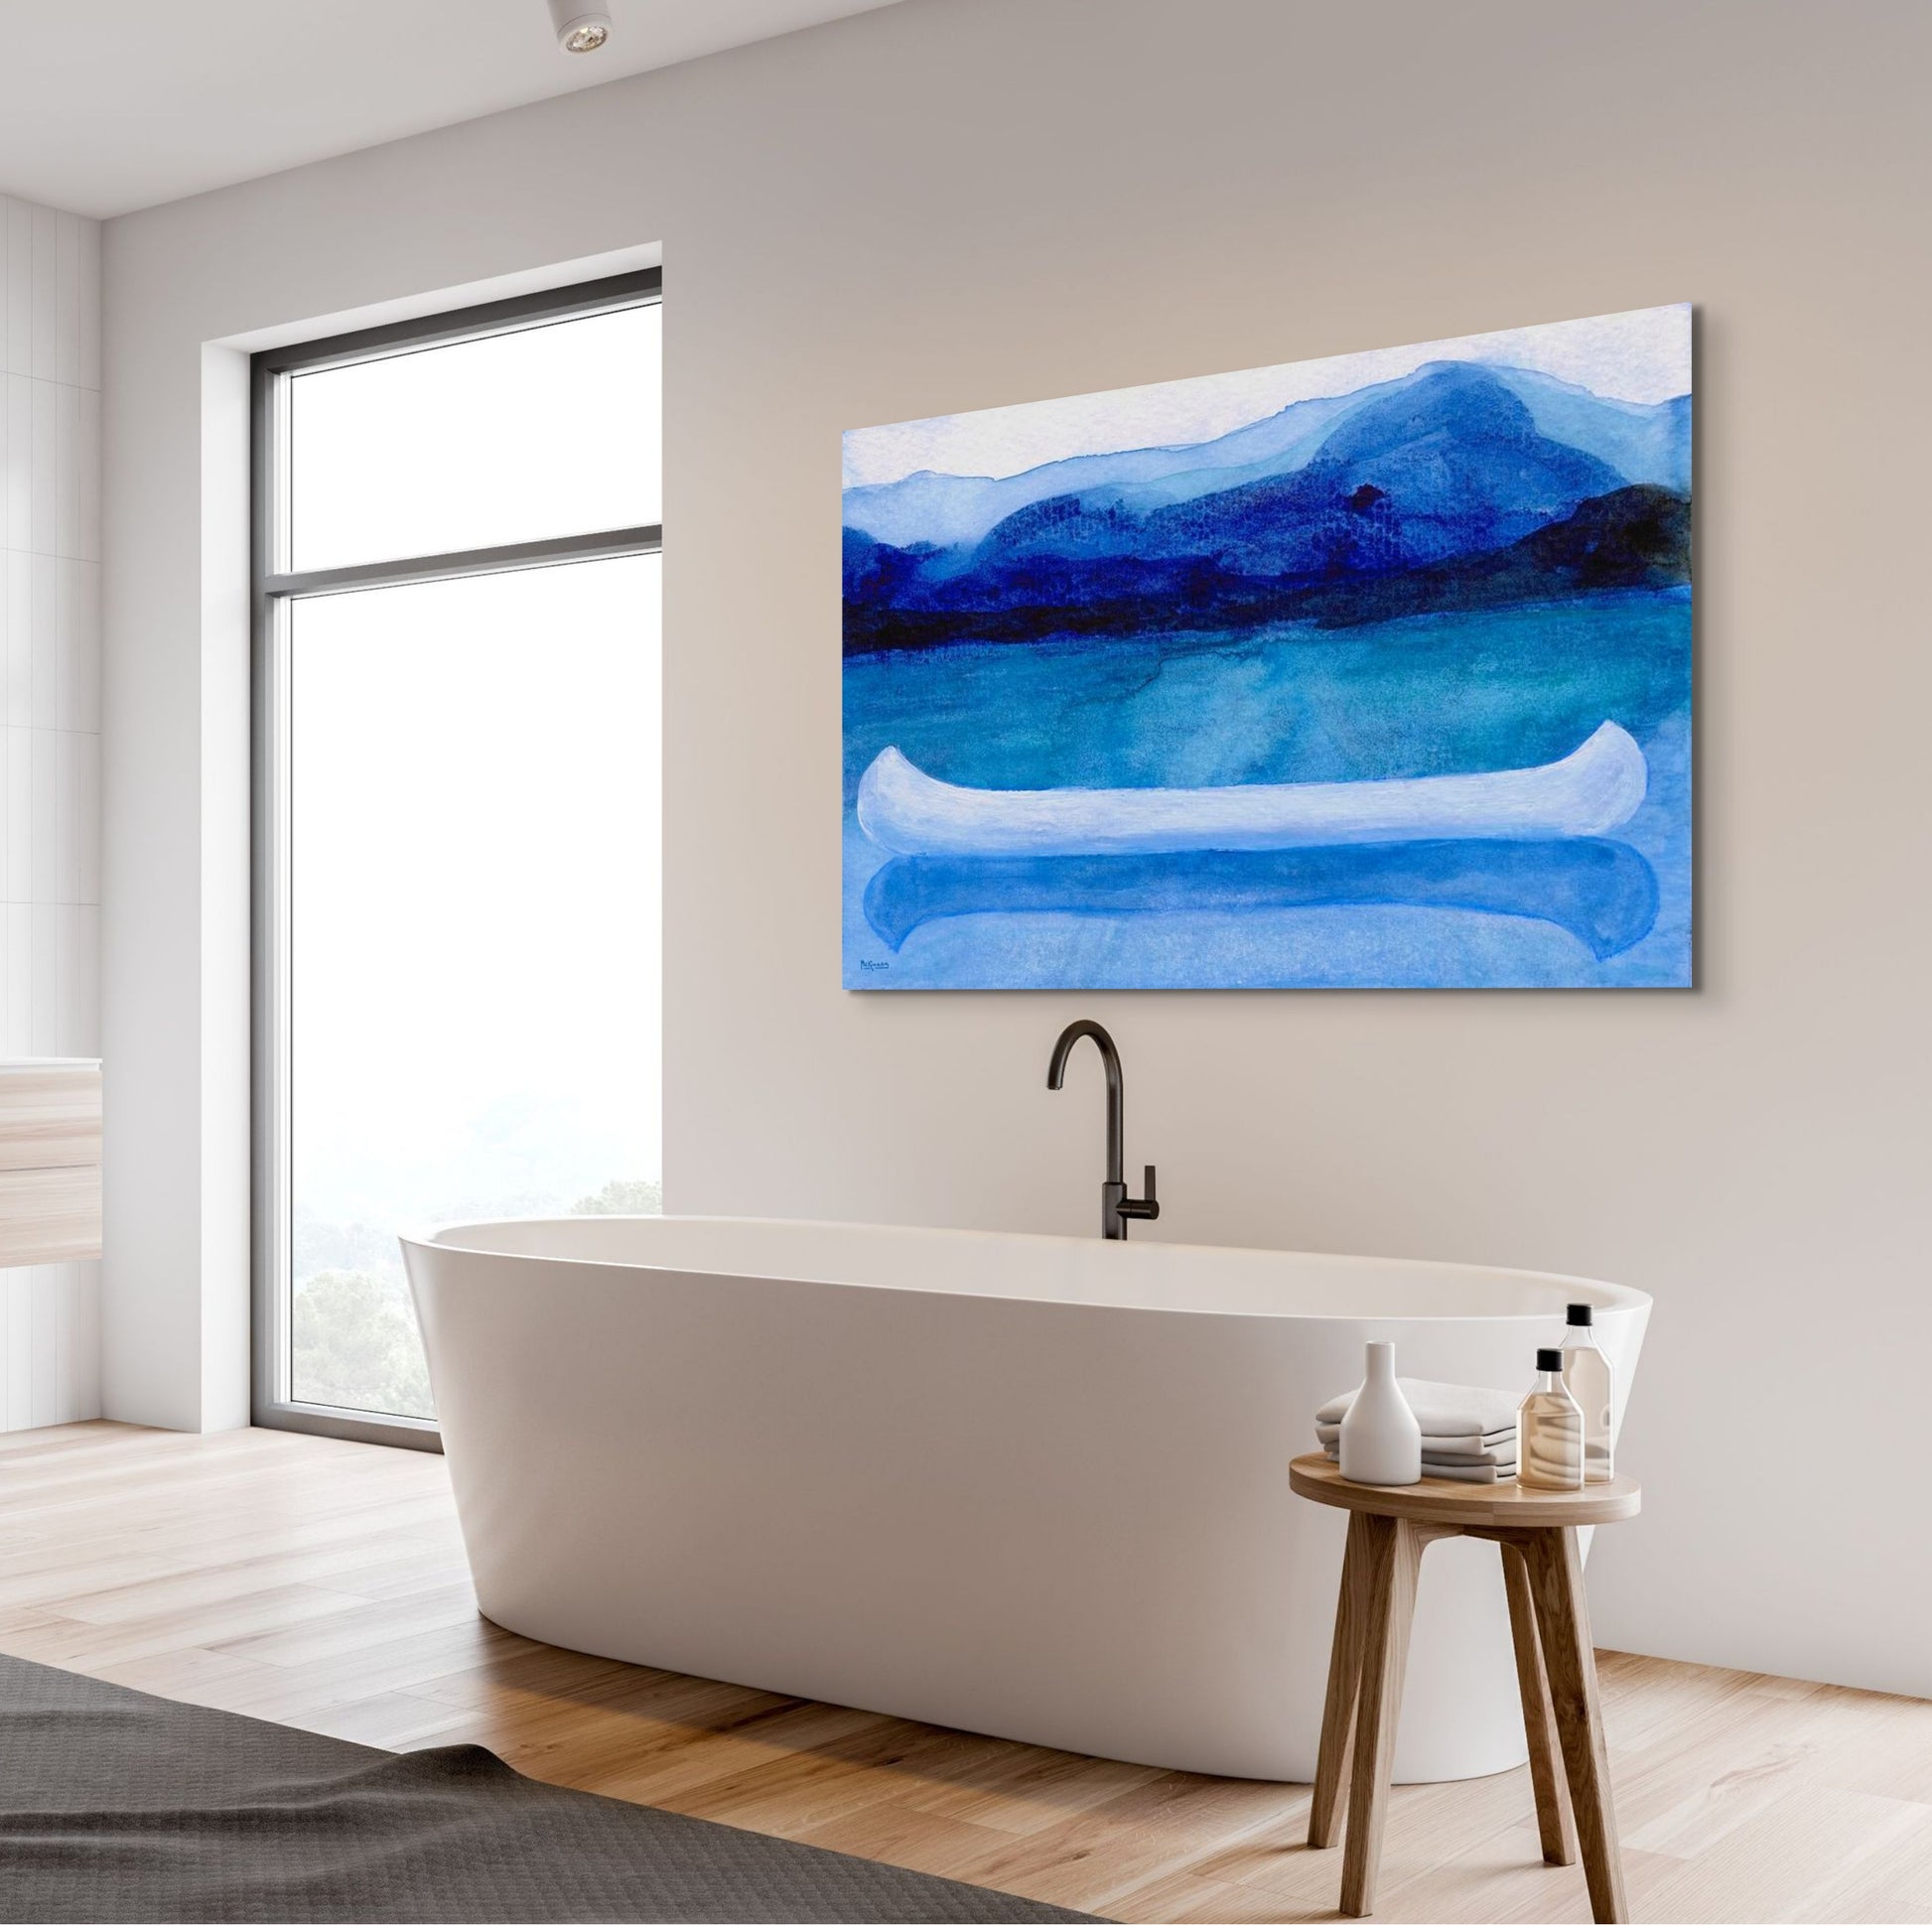 A work of canoeing art by Canadian artist Catherine McKinnon. The watercolor depicts a small white boat, a "canoe", on blue water with a dark blue distant shore and lighter blue distant moutains. The giclee print is frameless and is mounted on a light grey wall above a stylish, contemporary soaker tub.